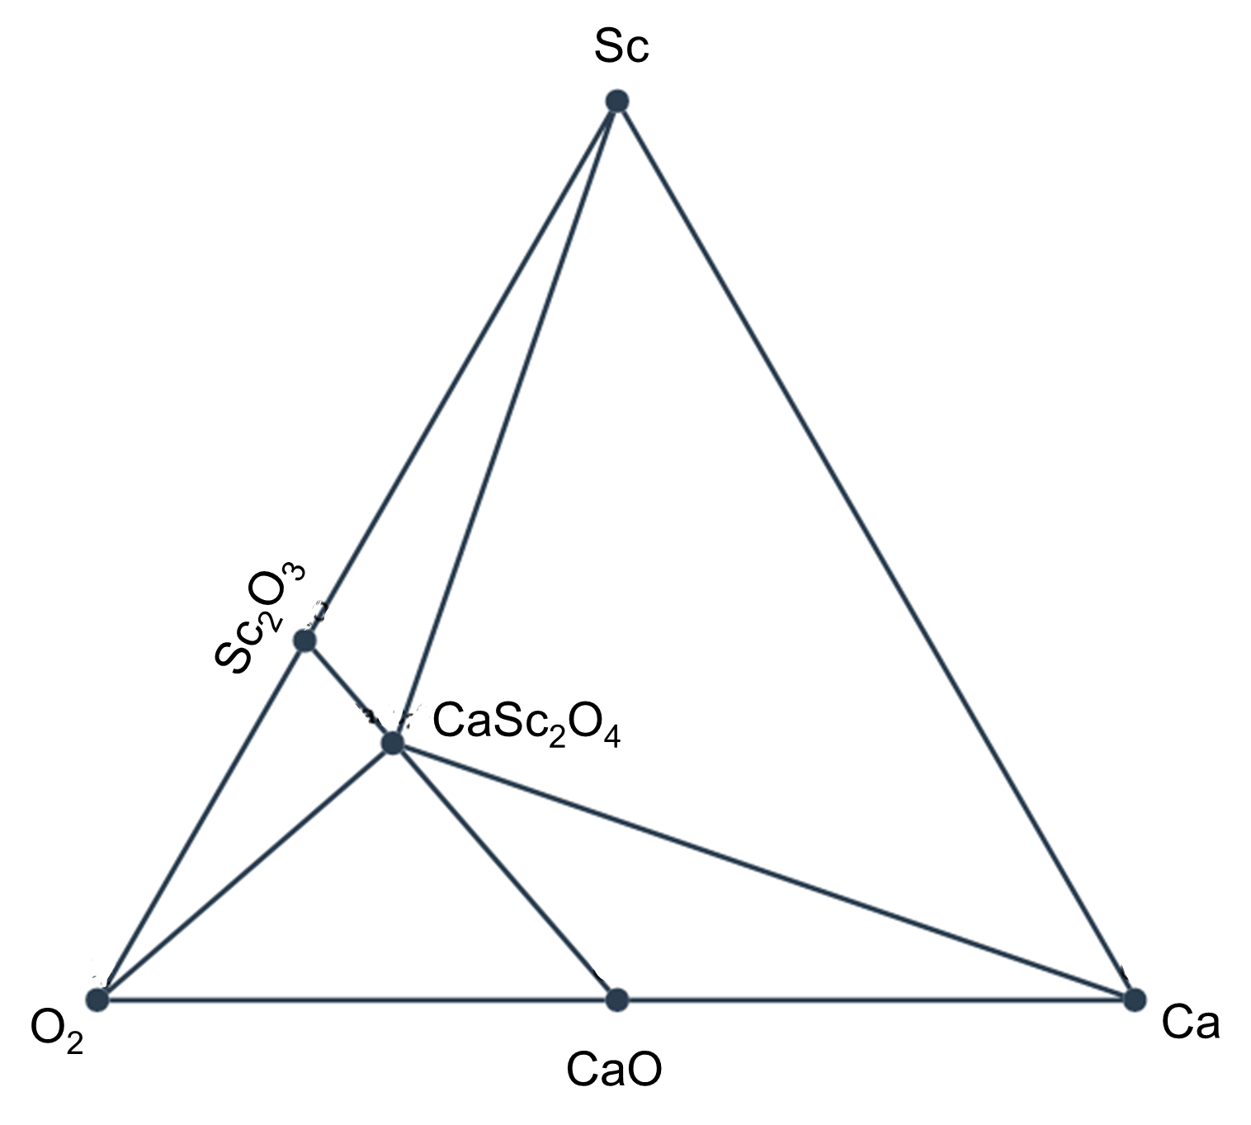 Phase diagram of the Ca-Sc-O system